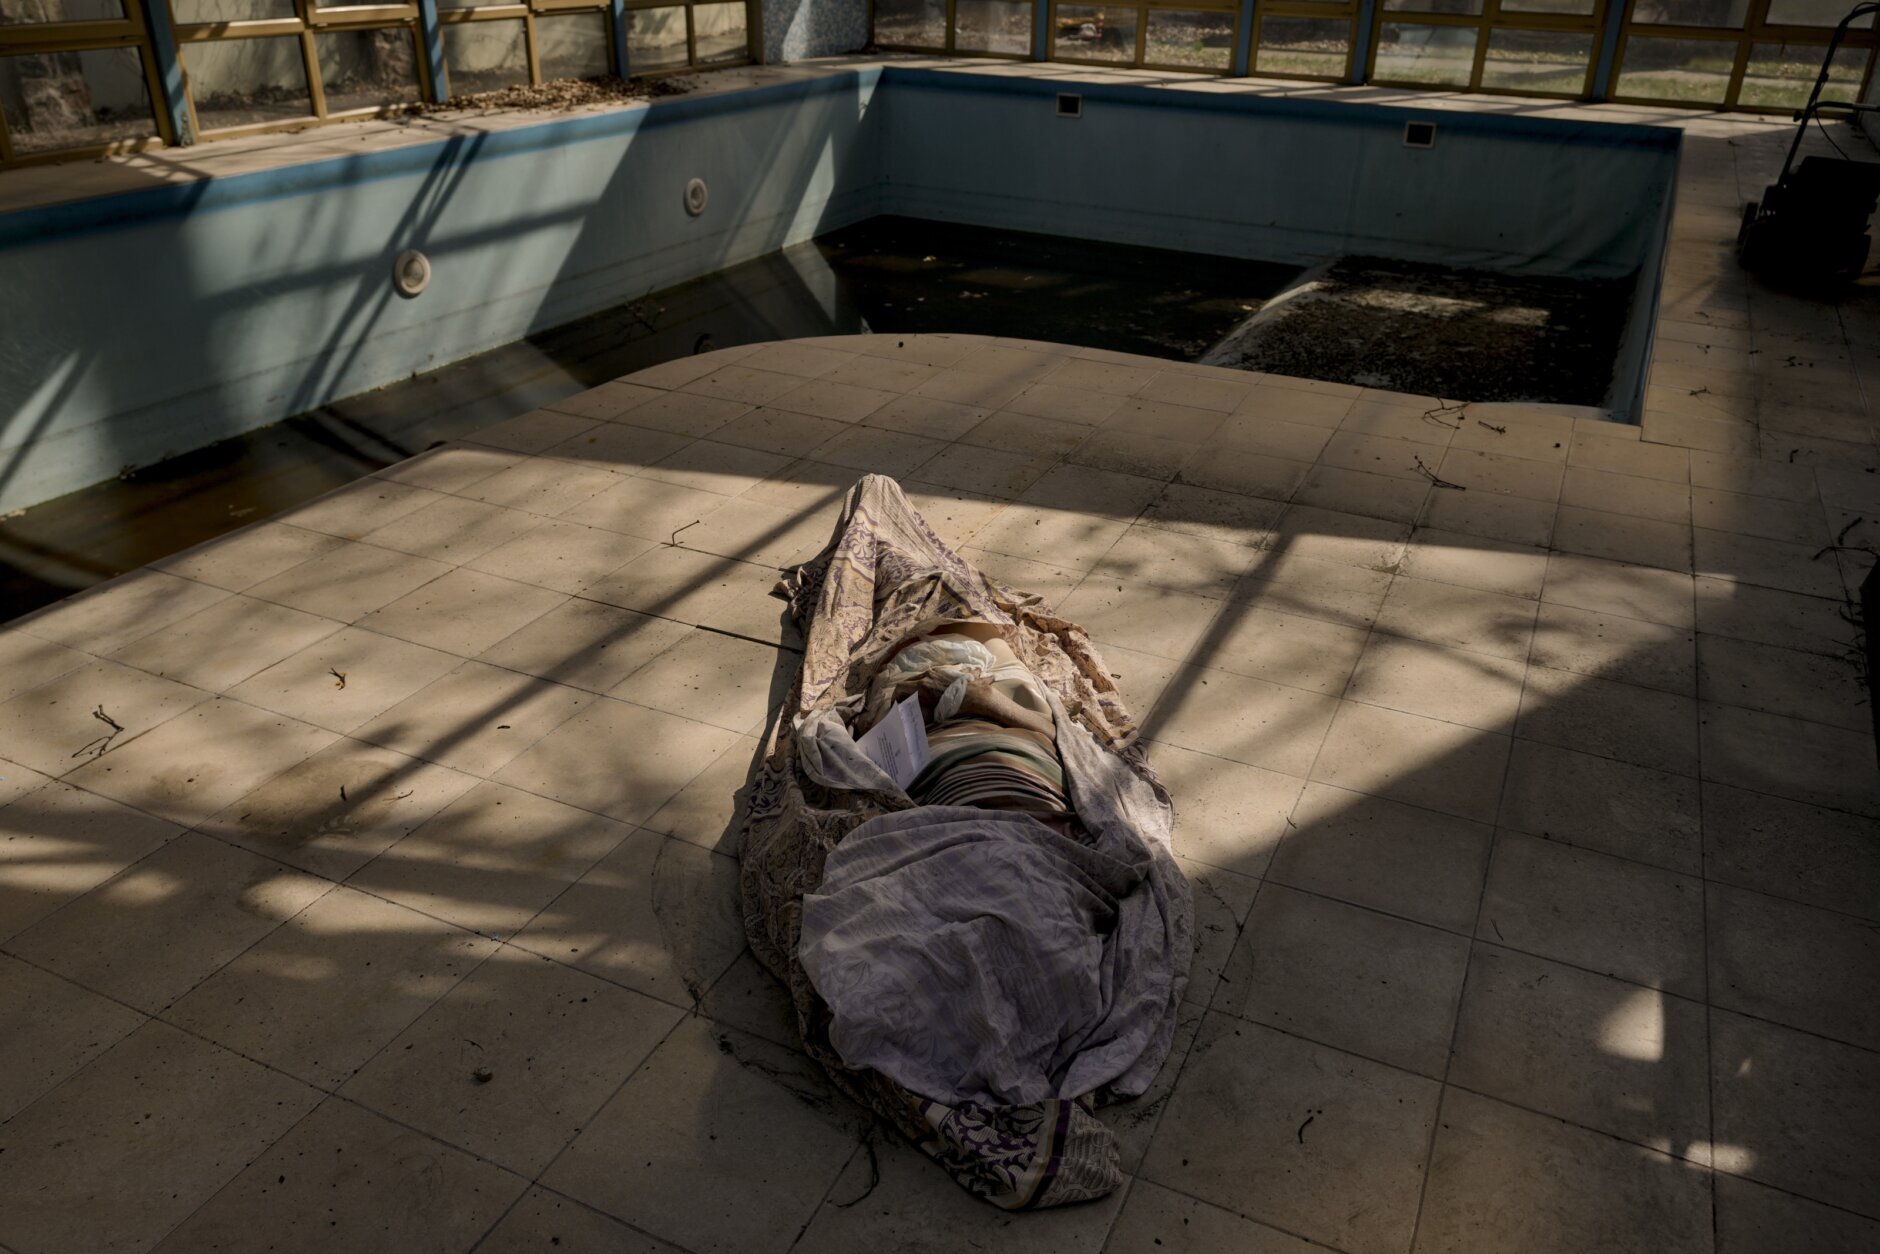 A dead body lies by the swimming pool of a home for the elderly in Bucha, Ukraine, Thursday, April 7, 2022. (AP Photo/Vadim Ghirda)